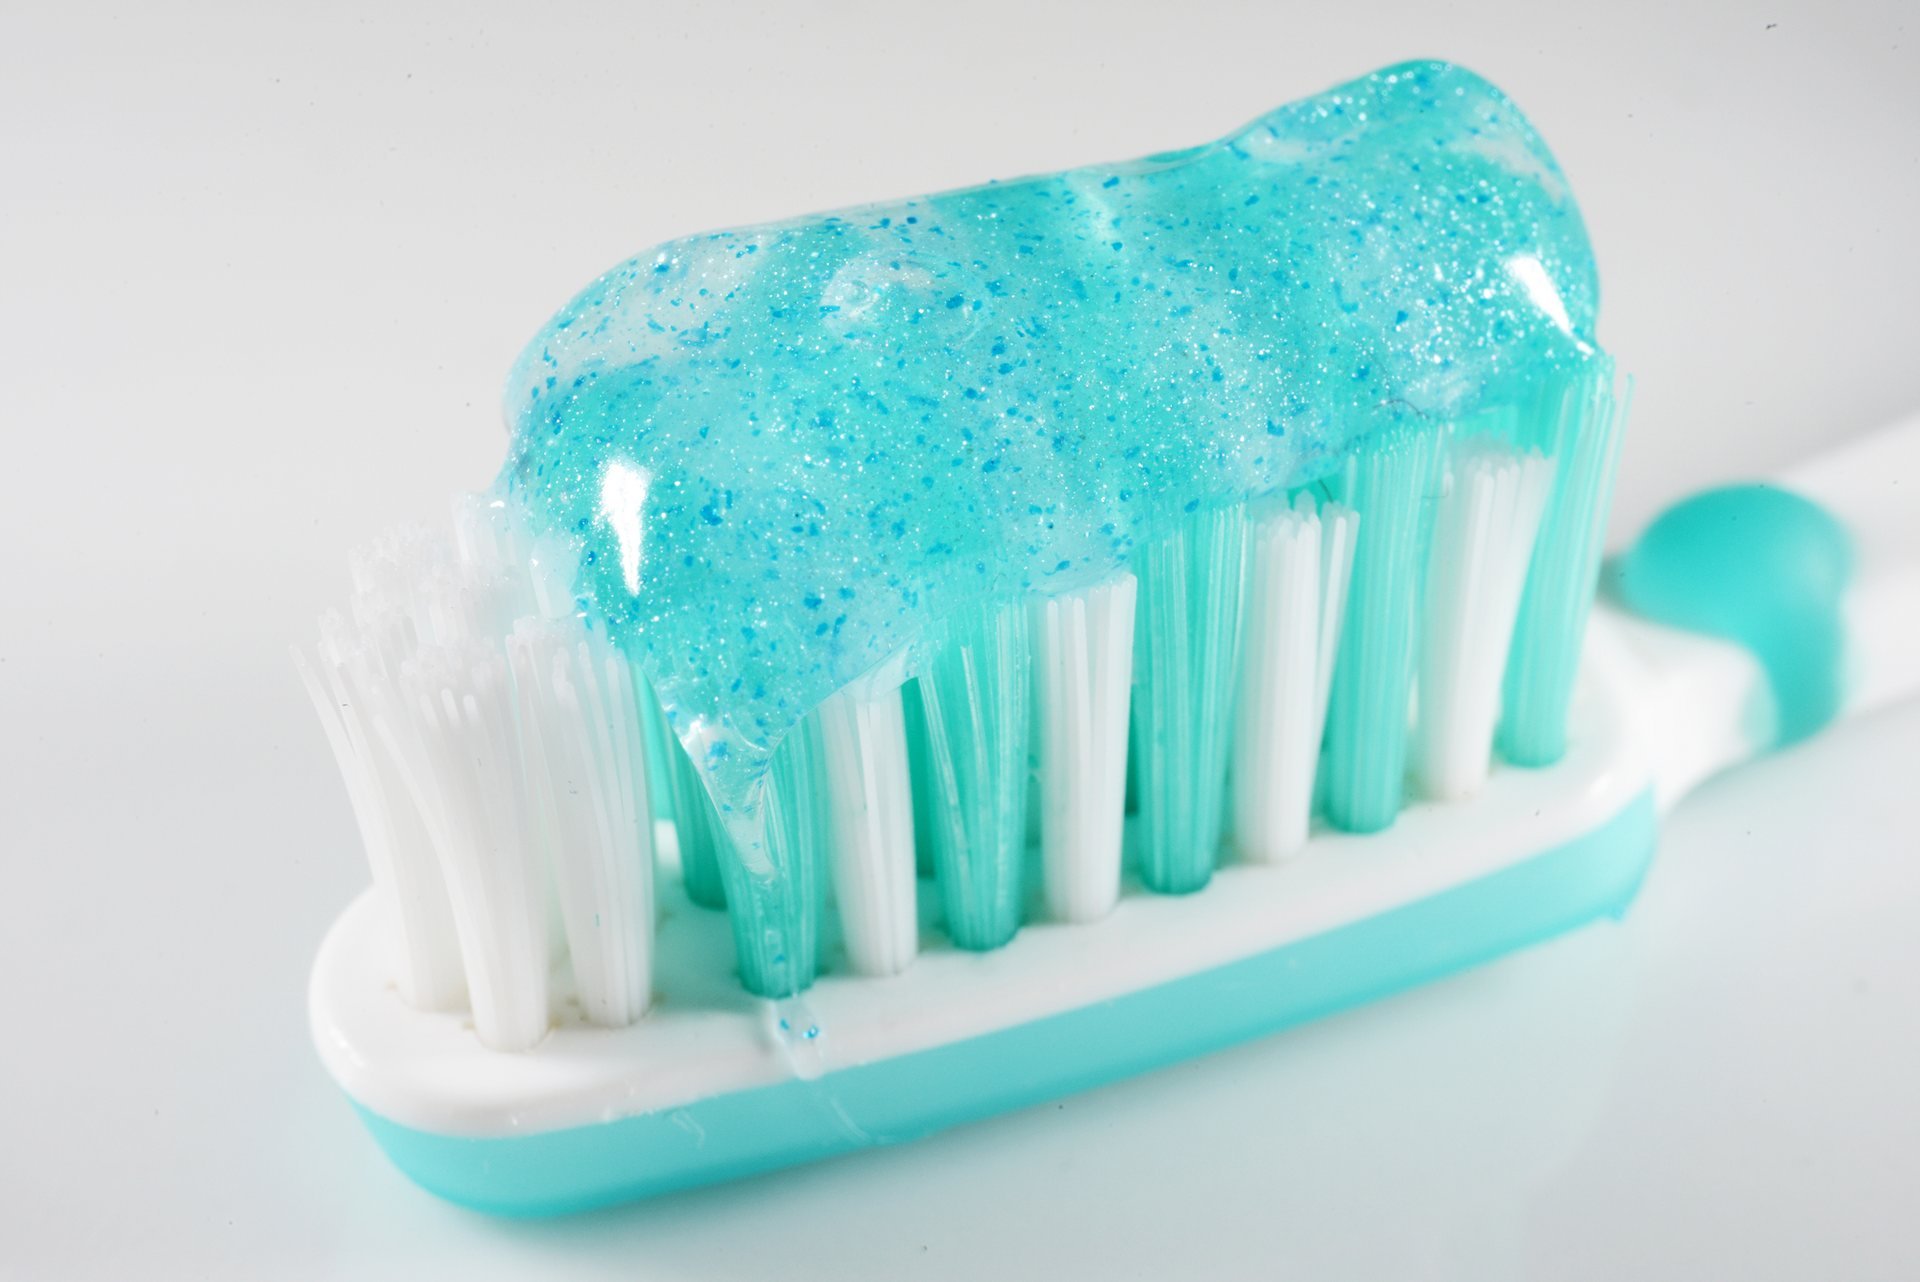 slither of toothpaste containing microbeads on a toothbrush